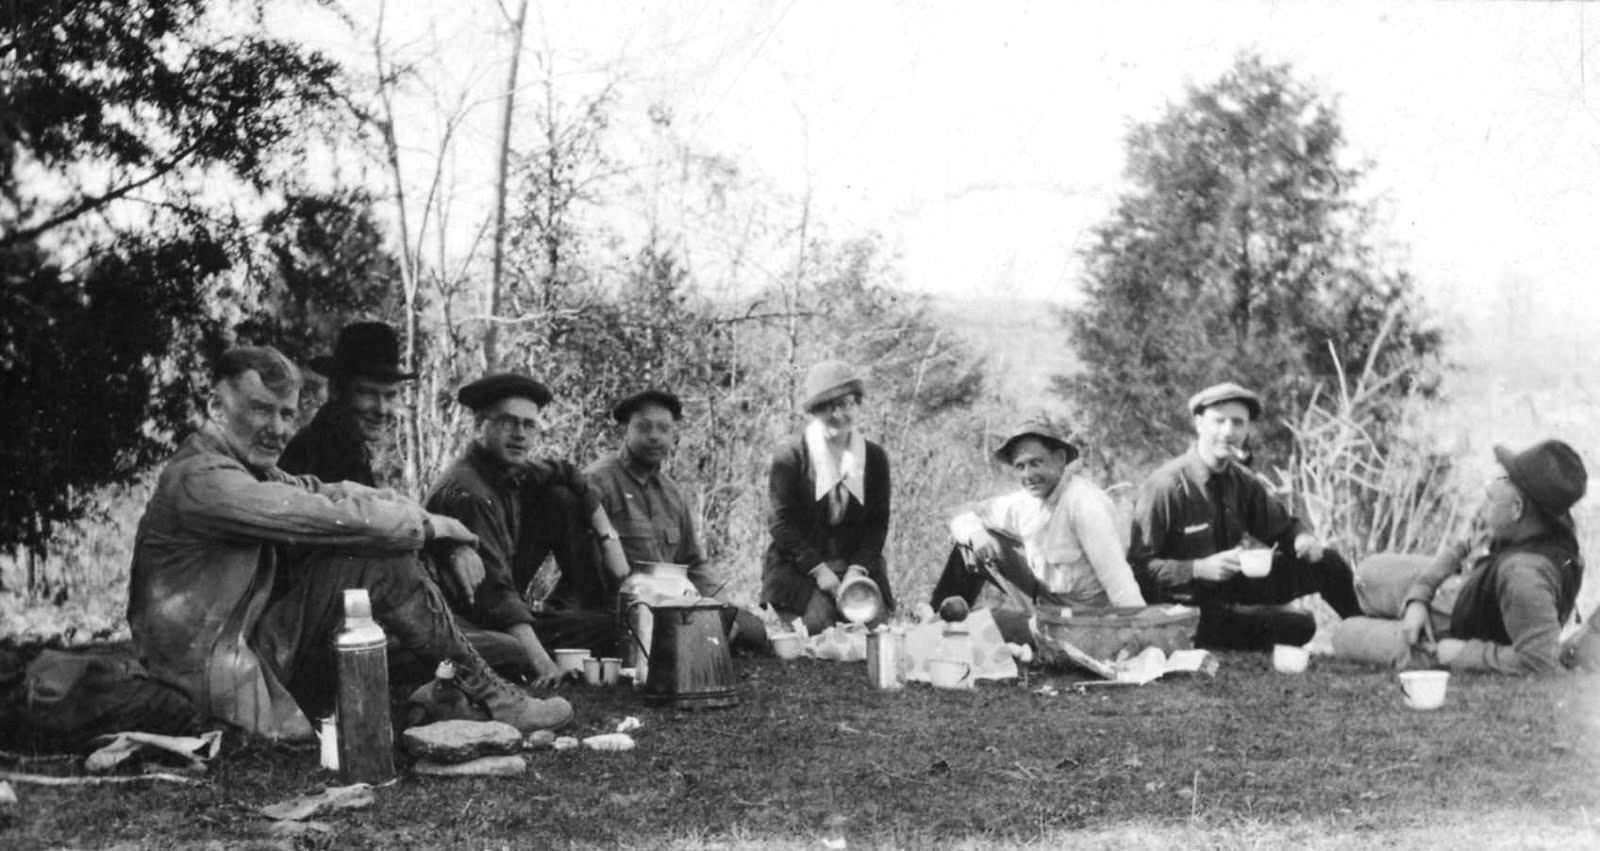 In 1919, Miller prepared "Geology of Kentucky" that was published by the Kentucky Geological Survey. Here he is seen (on left) as a member of a later exploration party at Hines Cave. Photo courtesy of UK Special Collections. 